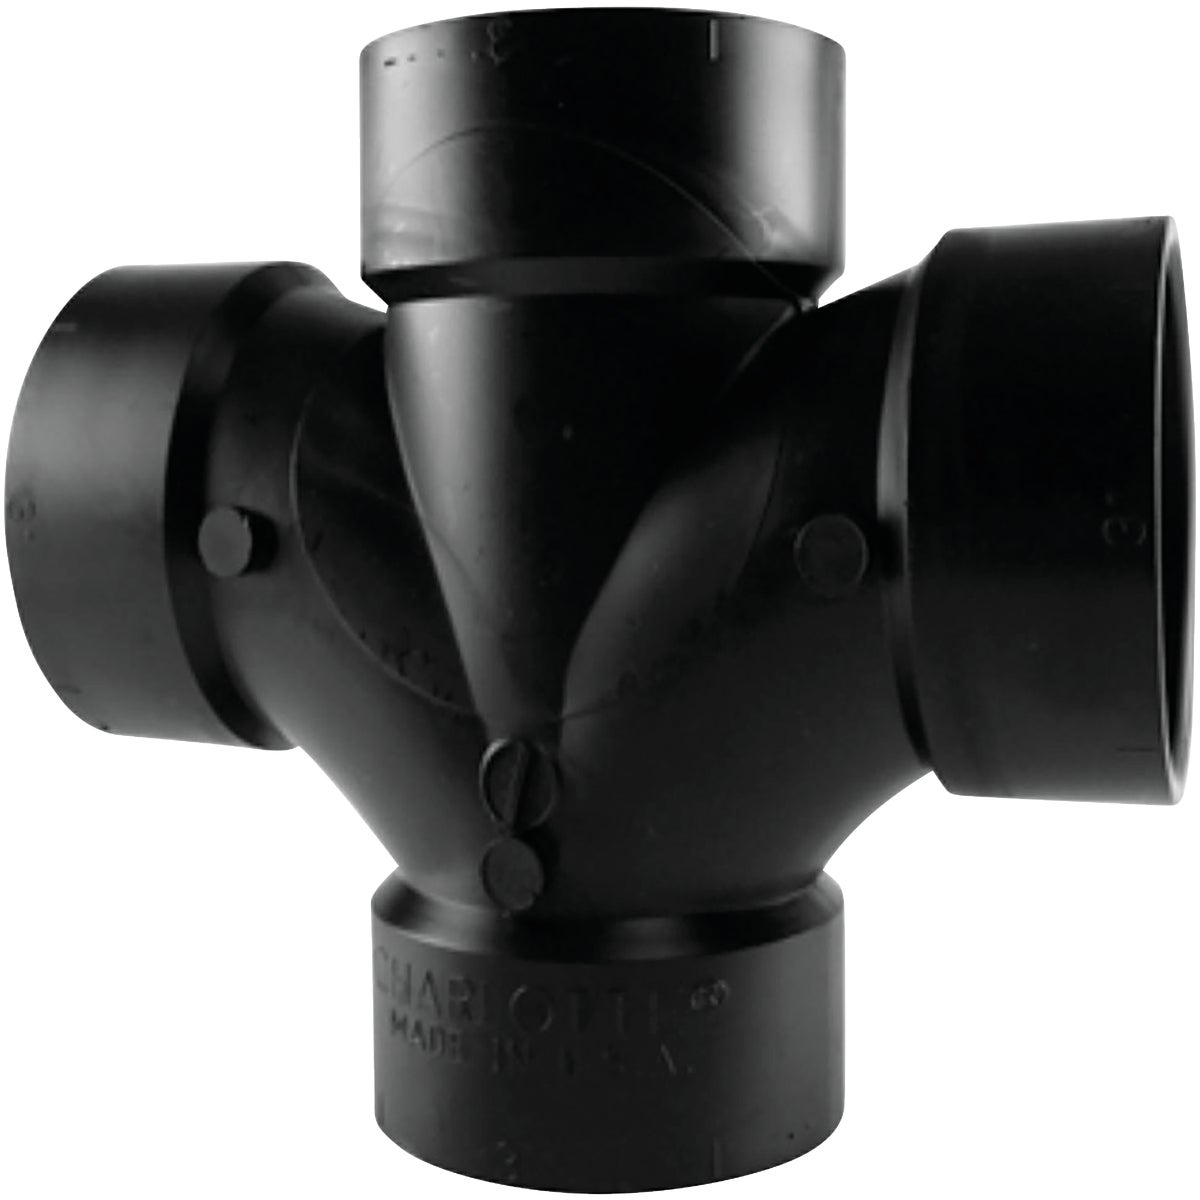 Charlotte Pipe 1-1/2 In. All Hub Double Sanitary ABS Waste & Vent Tee